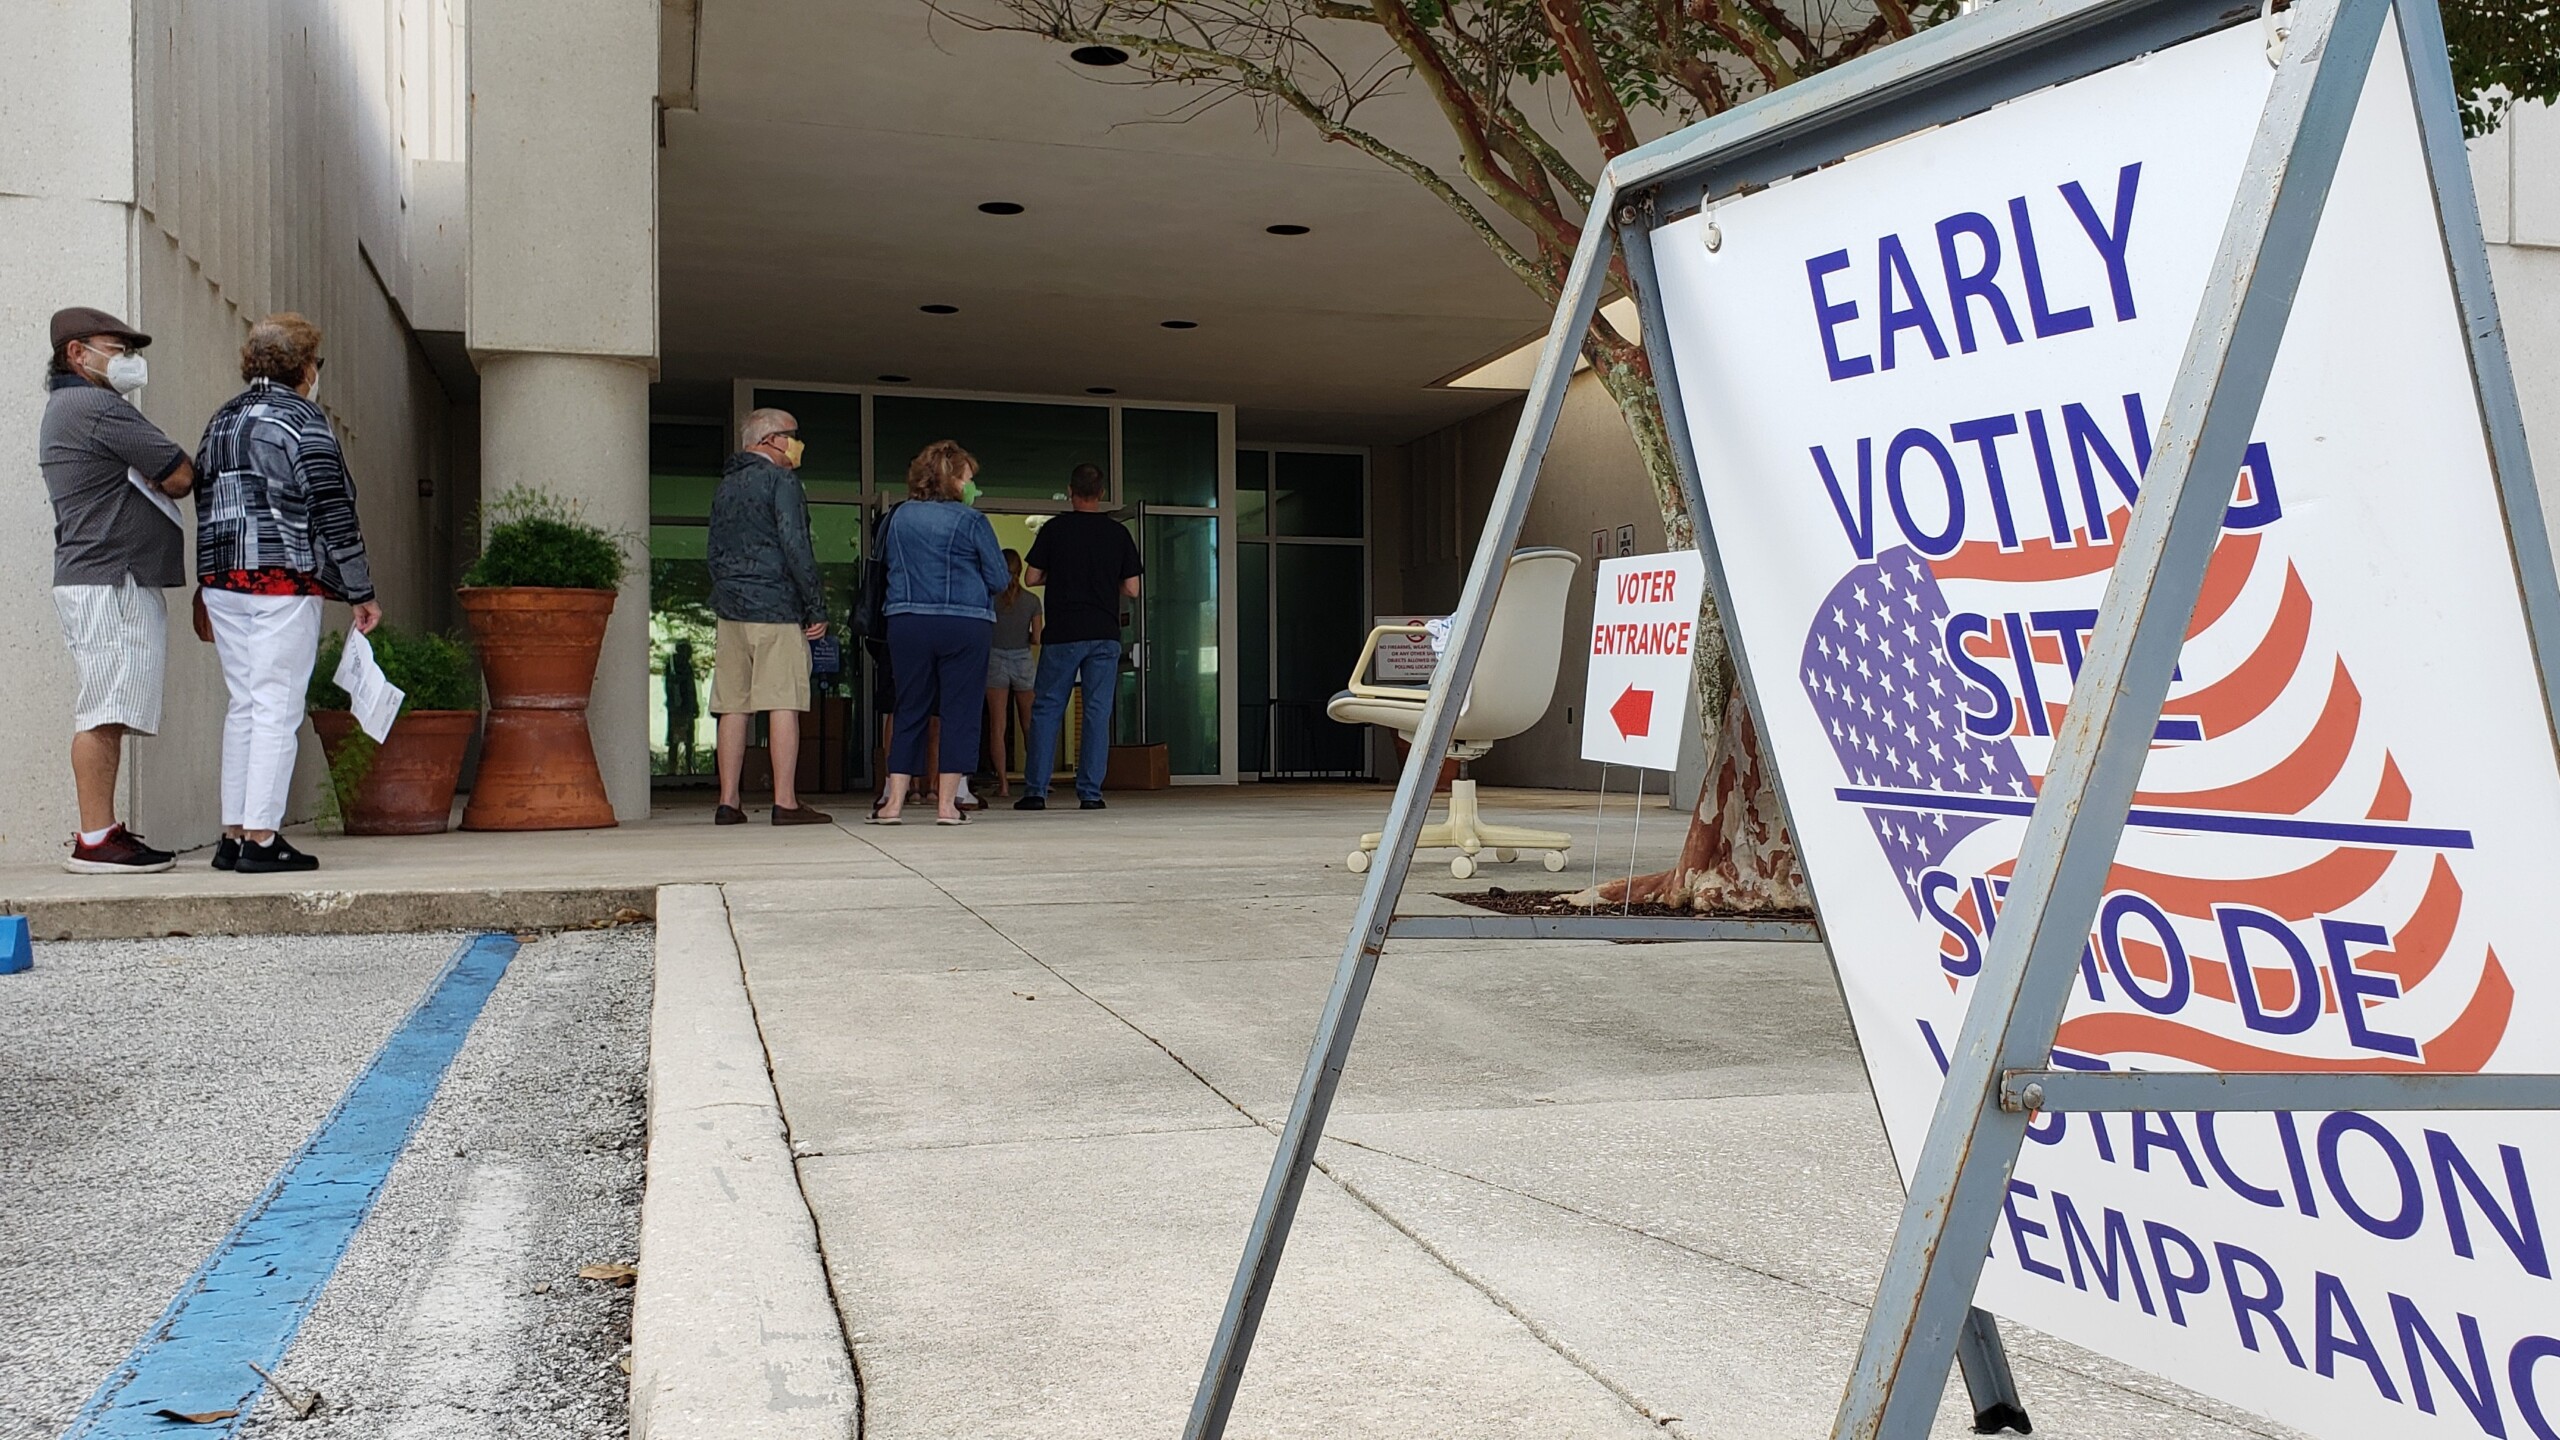 Featured image for “Early voting starts Monday in Duval County”